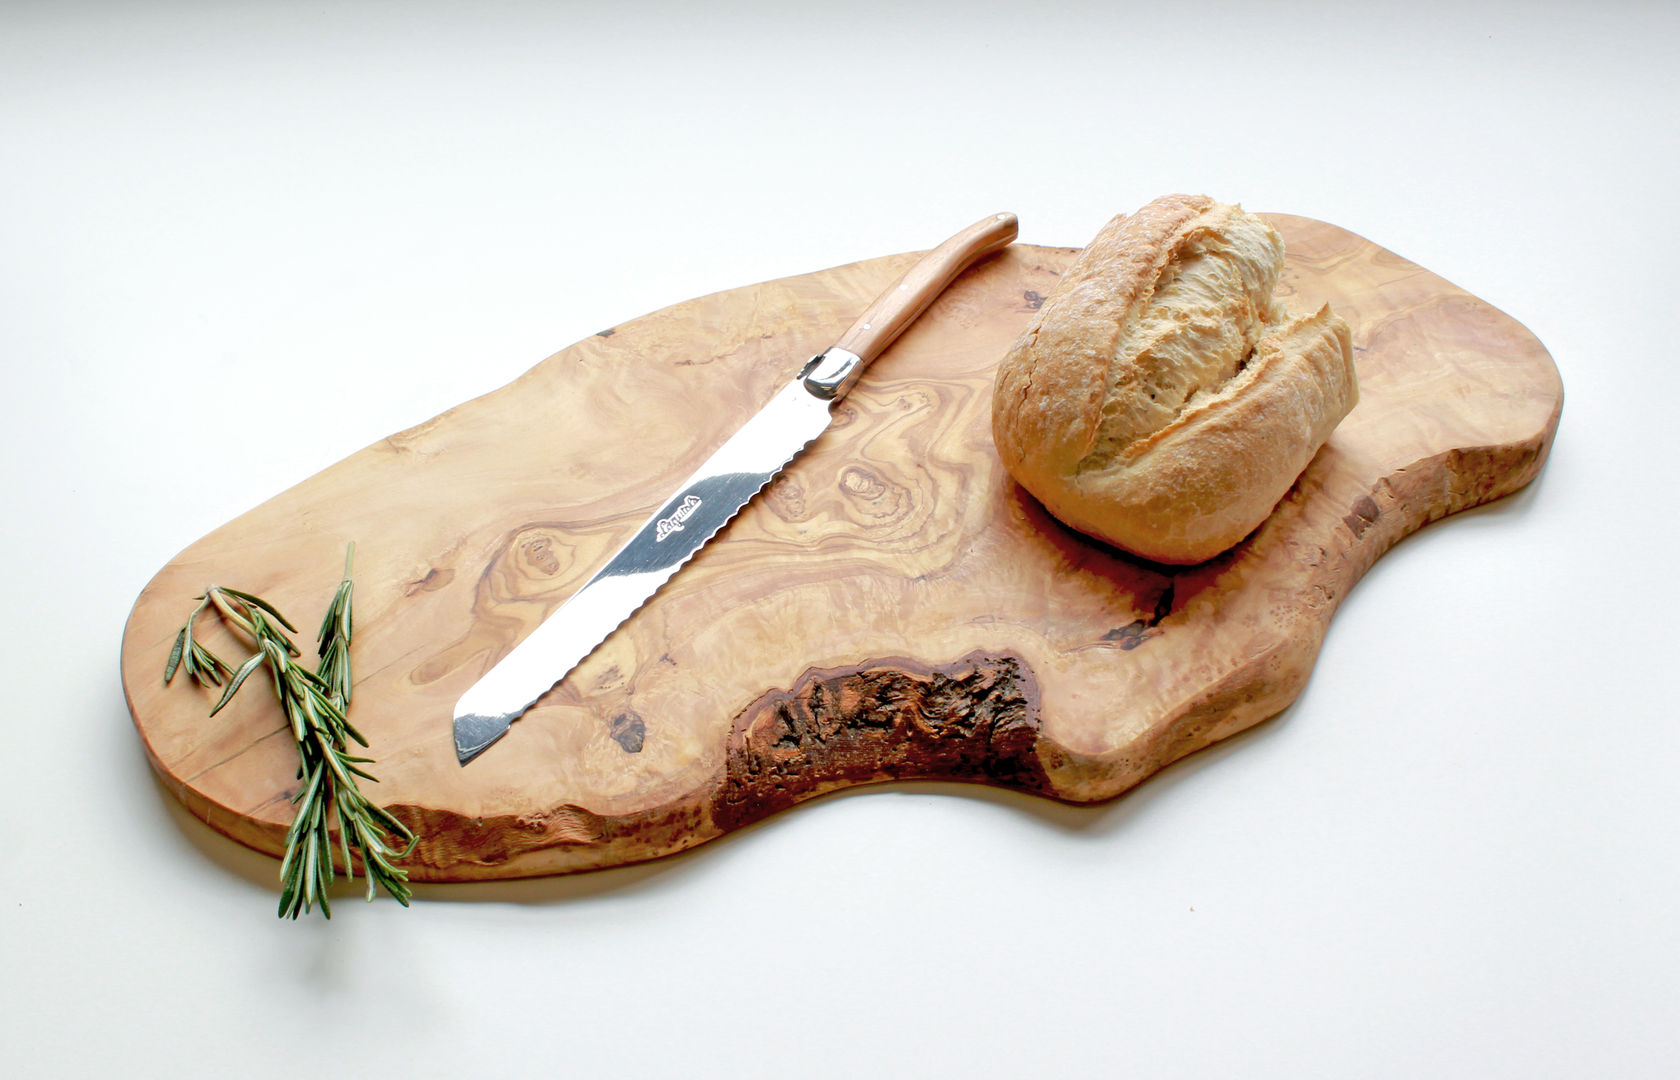 Large Rustic Olive Wood Serving Board, The Rustic Dish The Rustic Dish Rustieke keukens Keukengerei